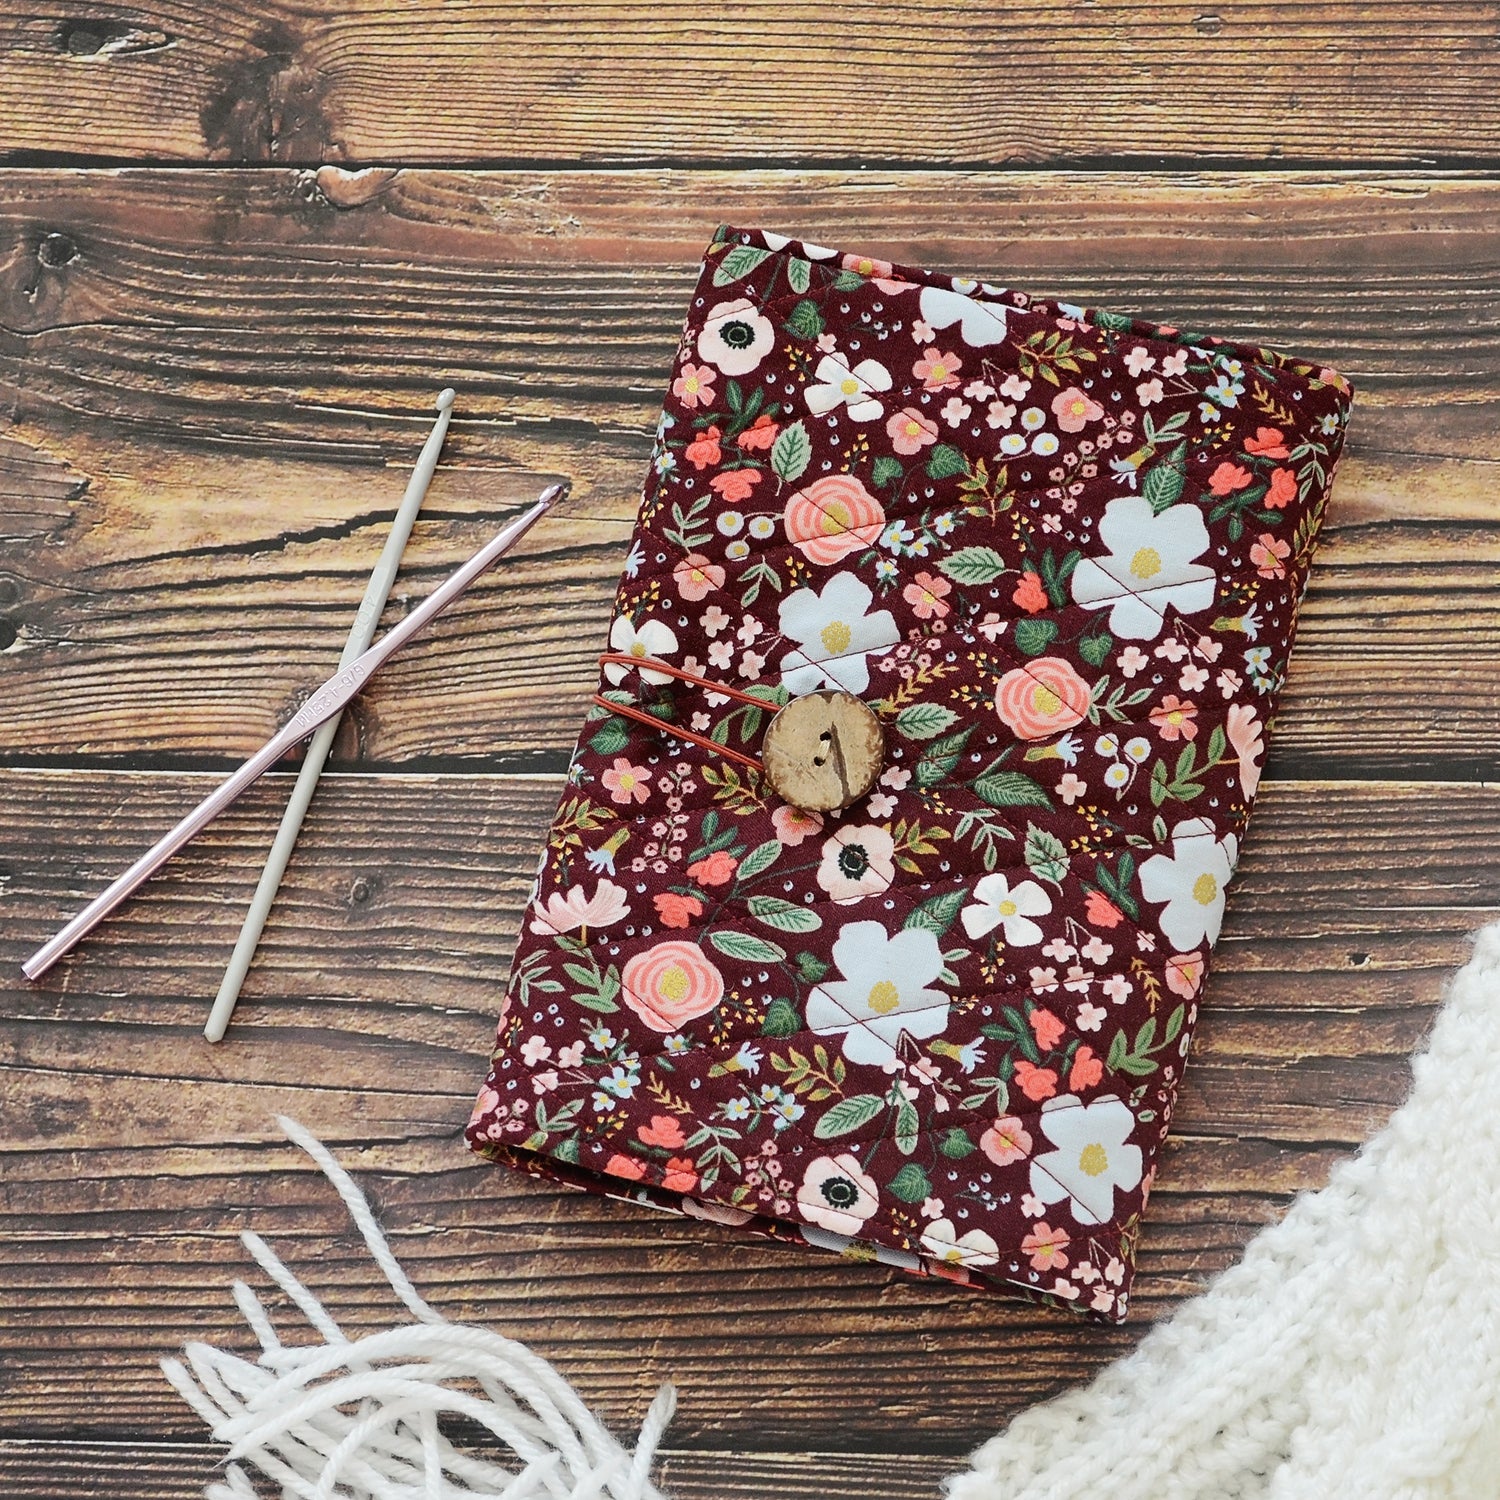 Quilted crochet hook wrap in burgundy floral Rifle Paper Co fabric.  Made in Canada by Yellow Petal Handmade.